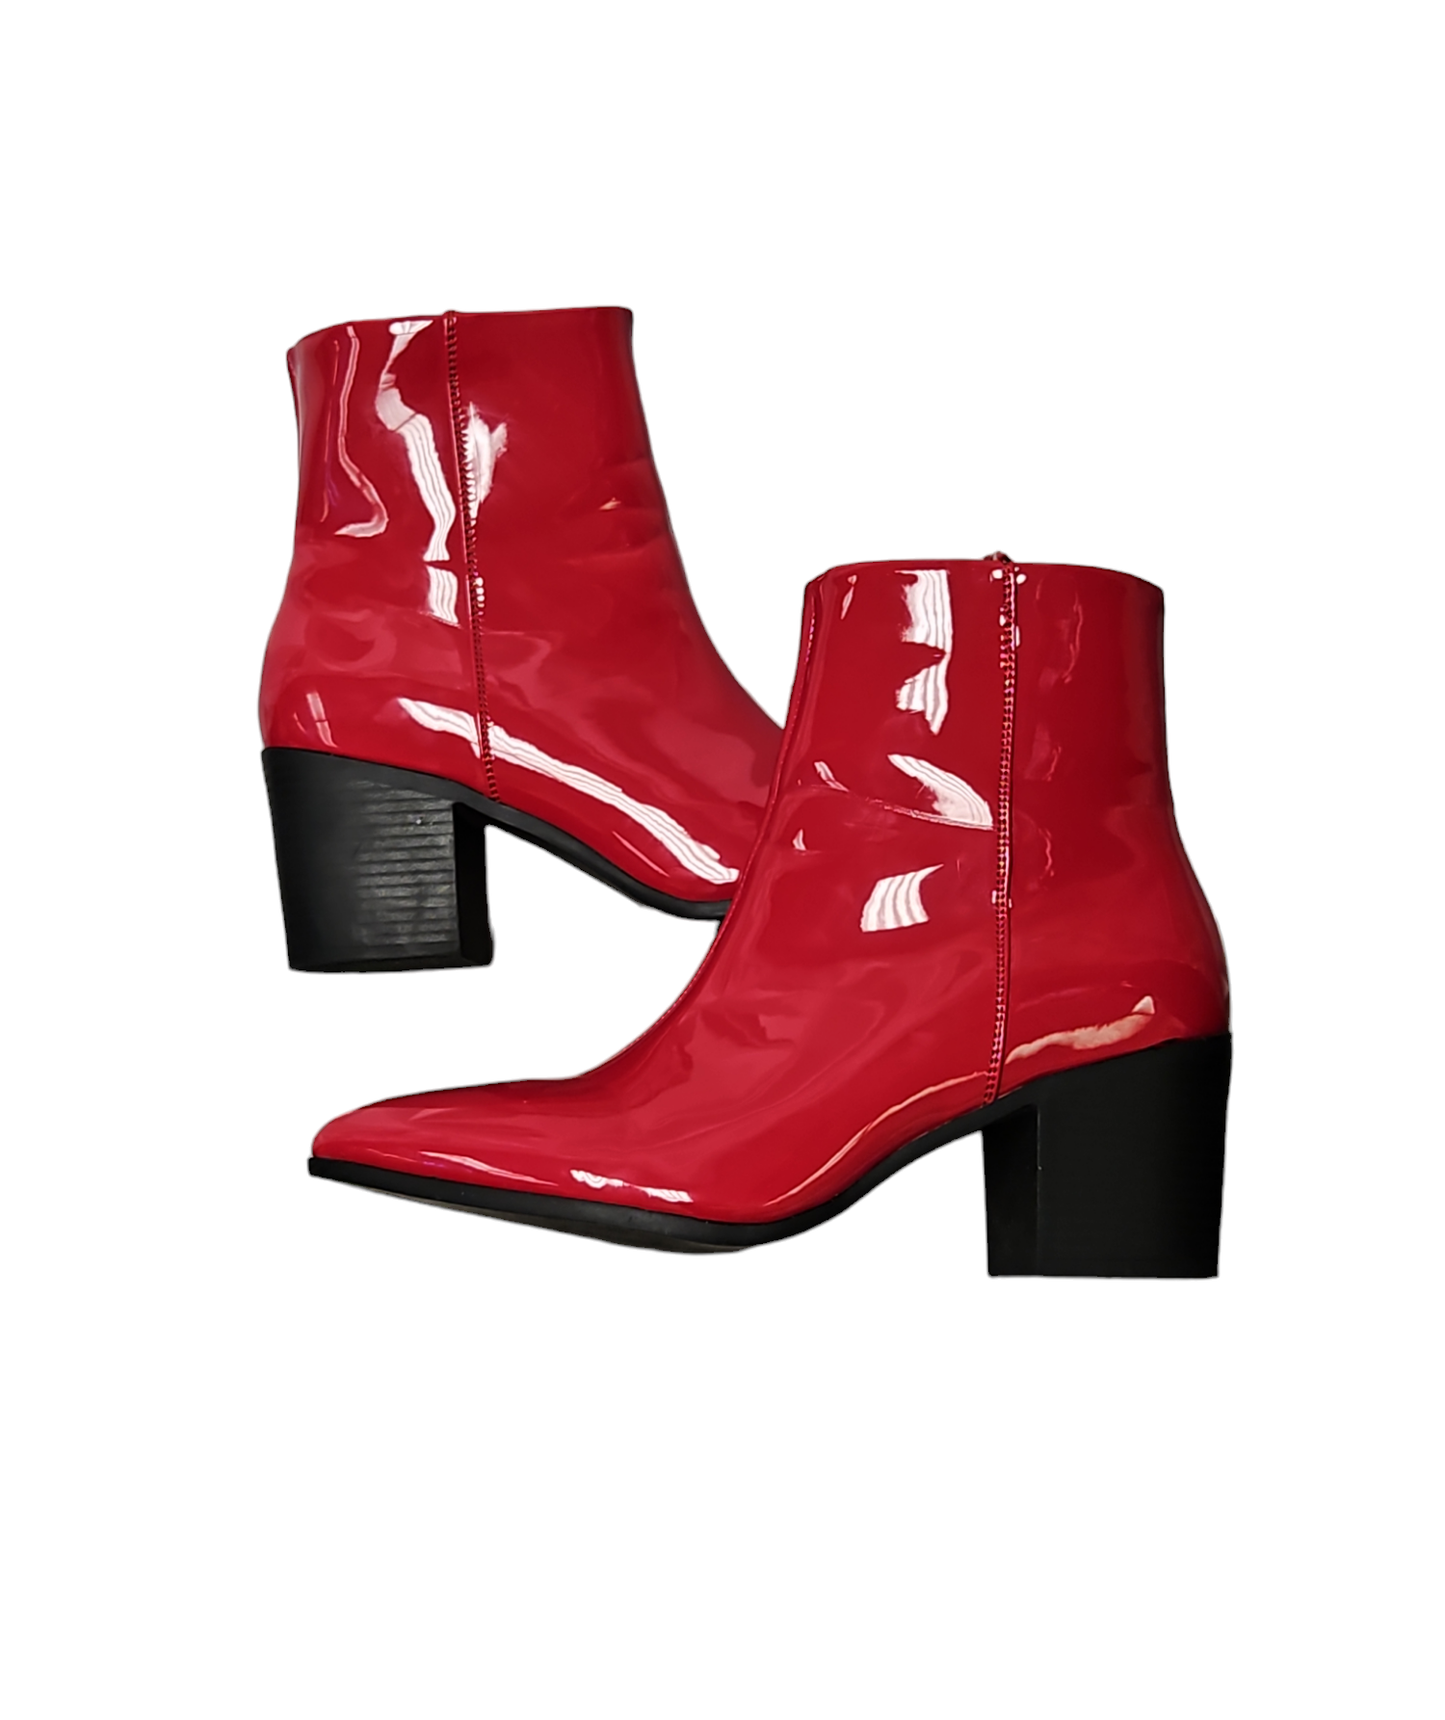 Asos Red Patent Leather Booties Size 10